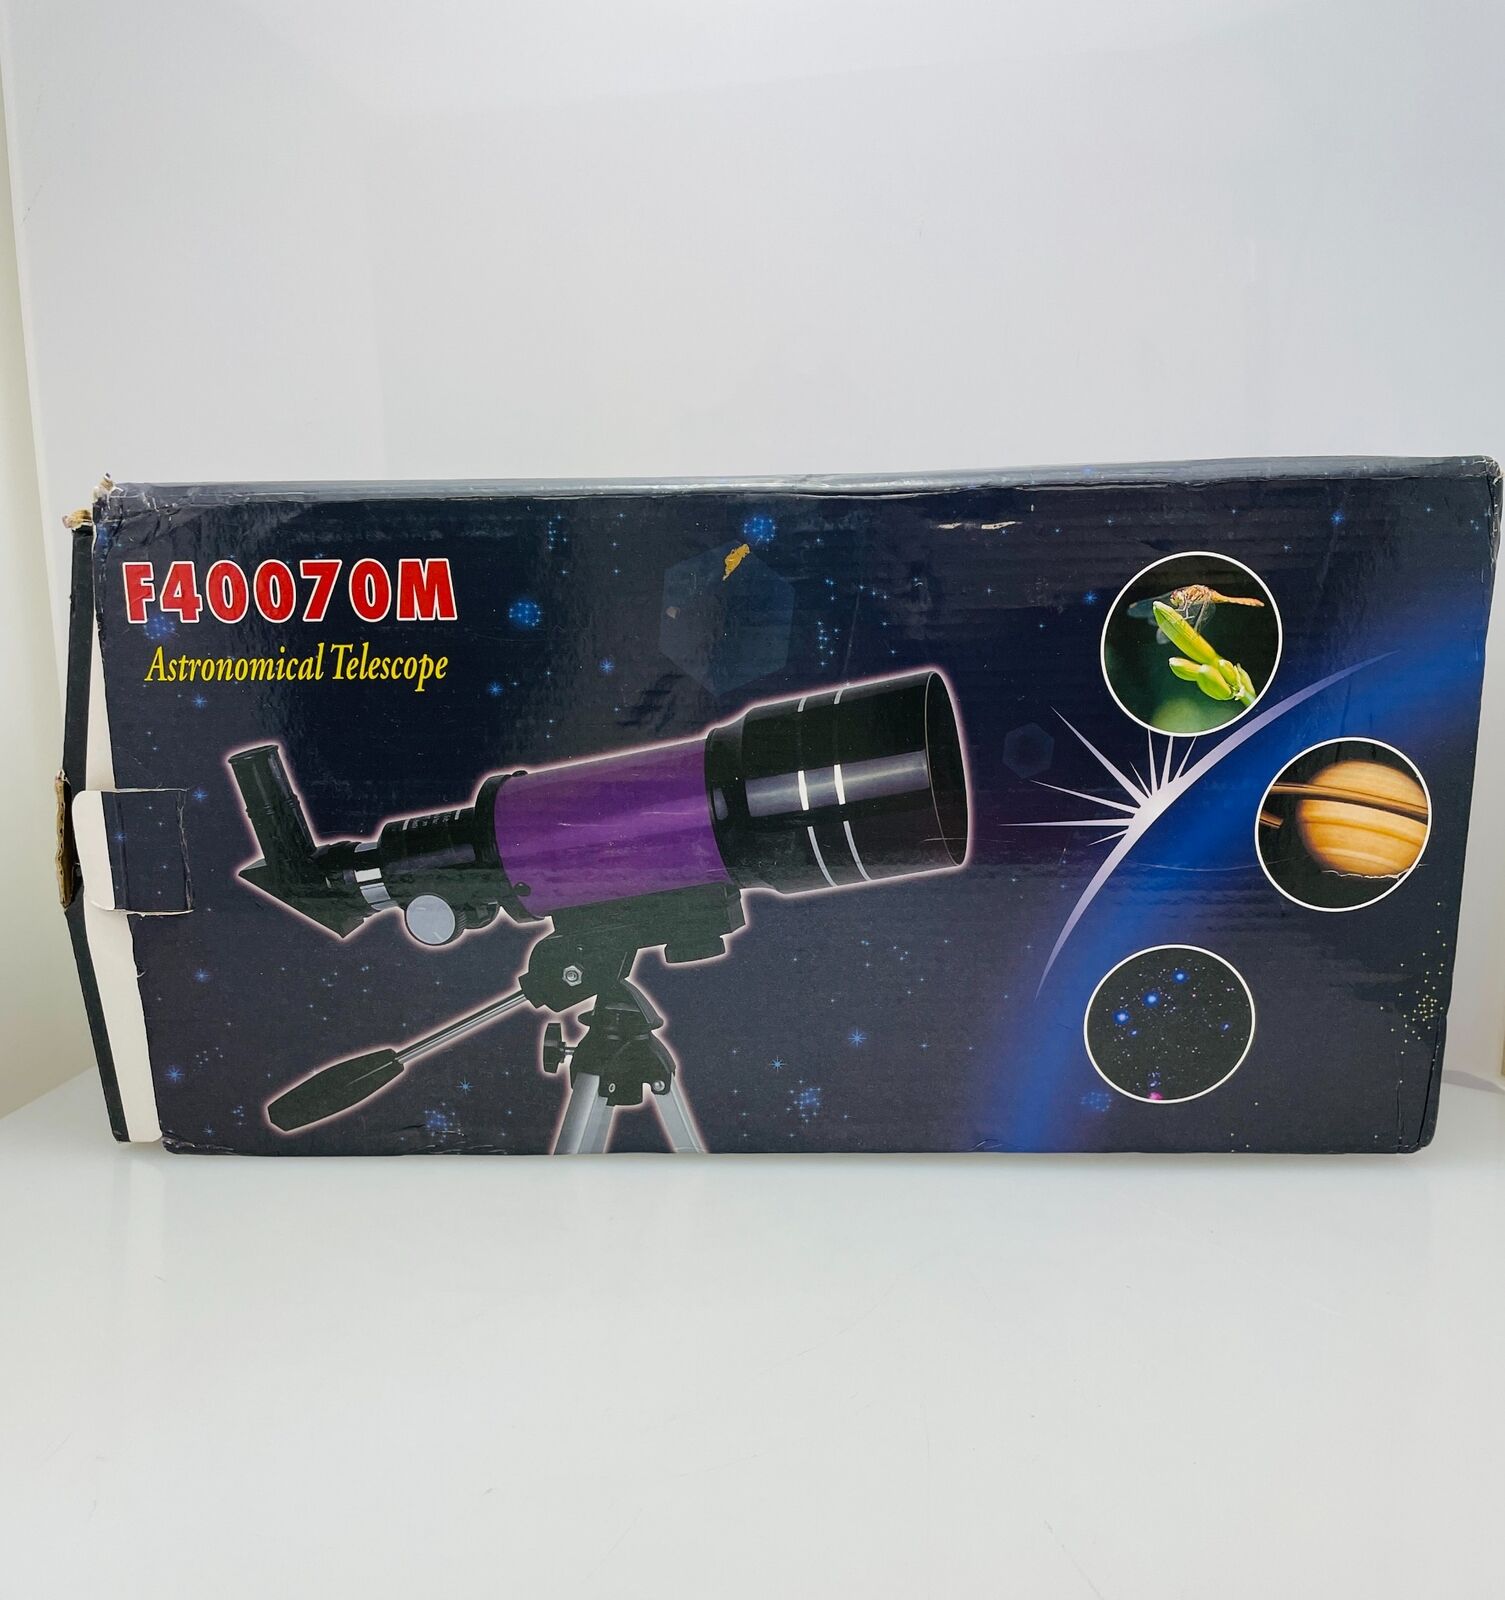 Terrestrial and Astronomical Telescope F40070M